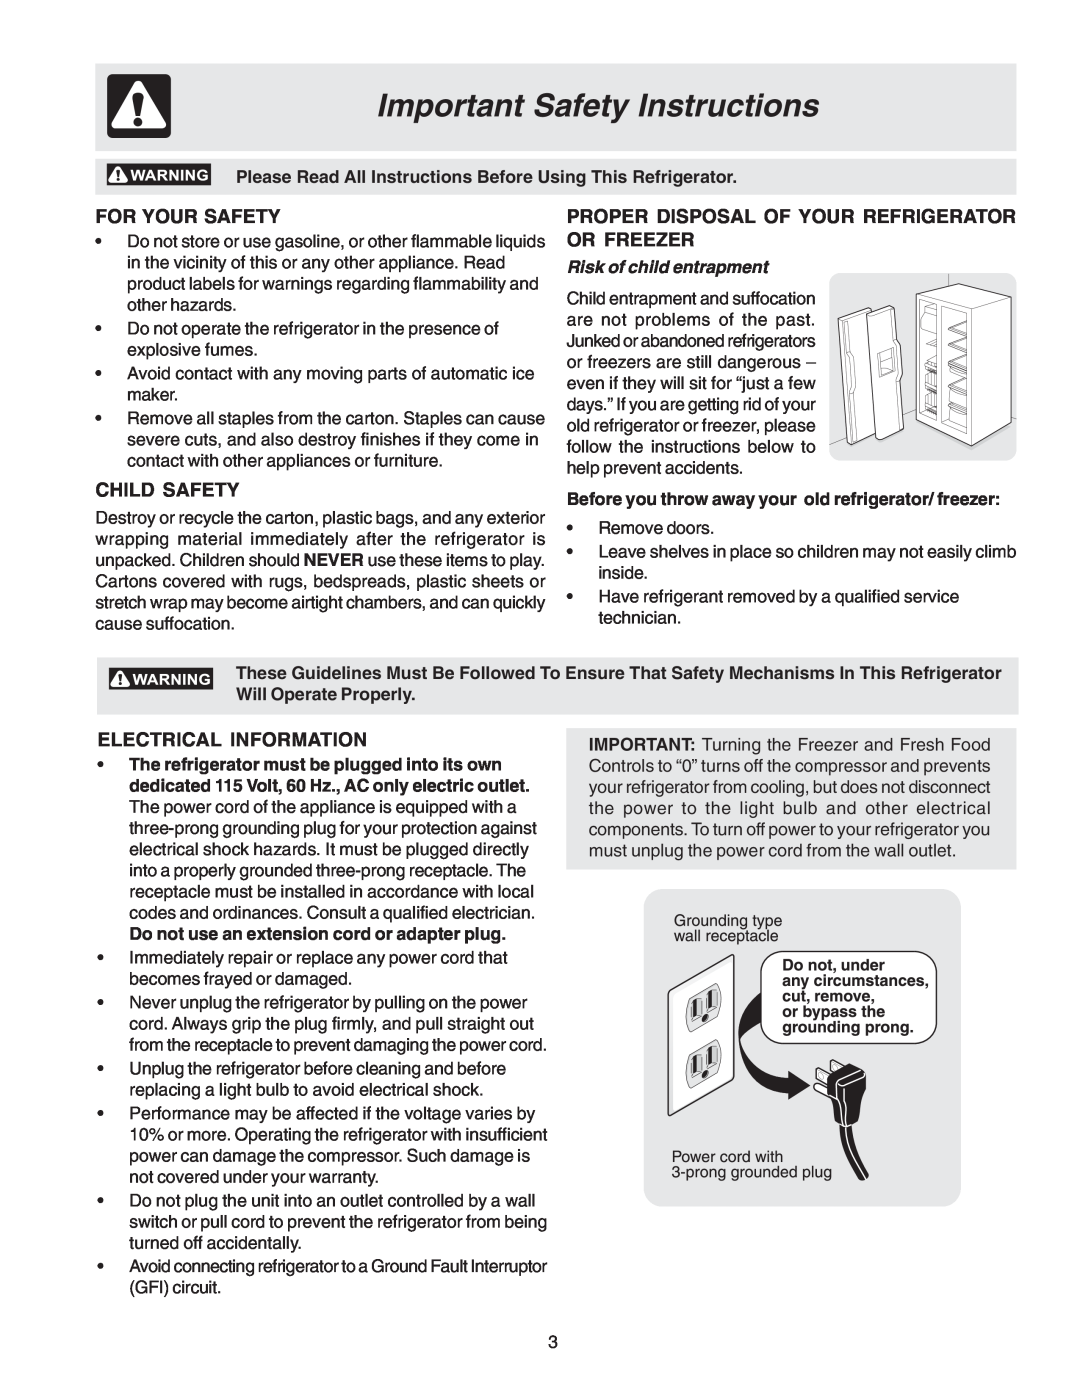 Frigidaire FRS26R4AW6 Important Safety Instructions, For Your Safety, Proper Disposal Of Your Refrigerator Or Freezer 